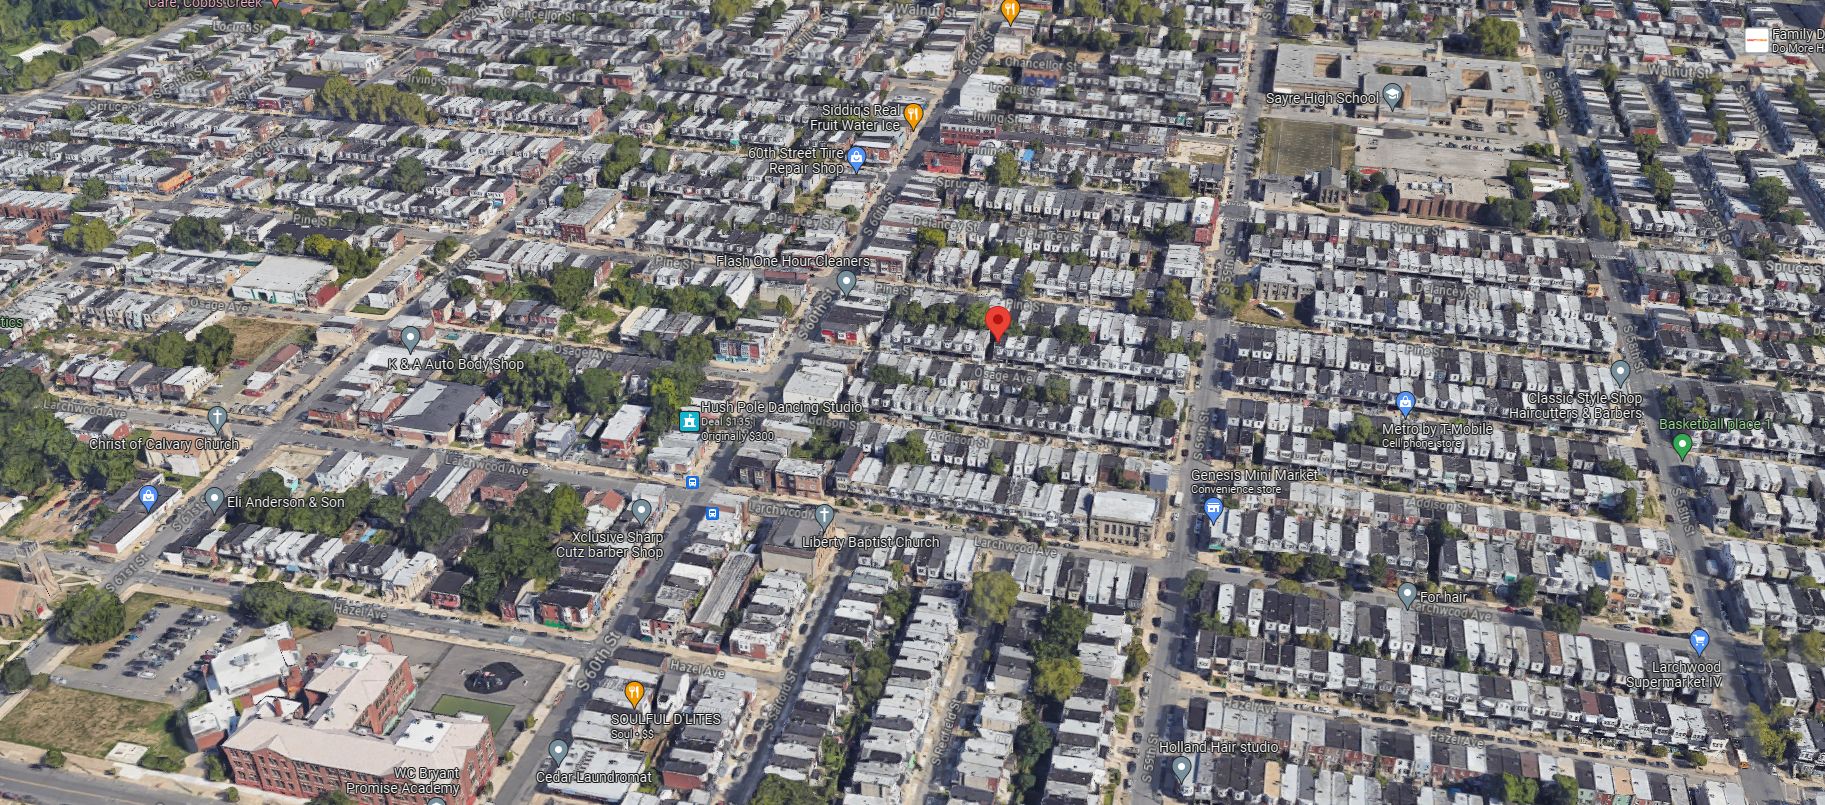 Cobbs Creek and 5937 Osage Avenue. Aerial view prior to redevelopment. Looking north. Credit: Google Maps